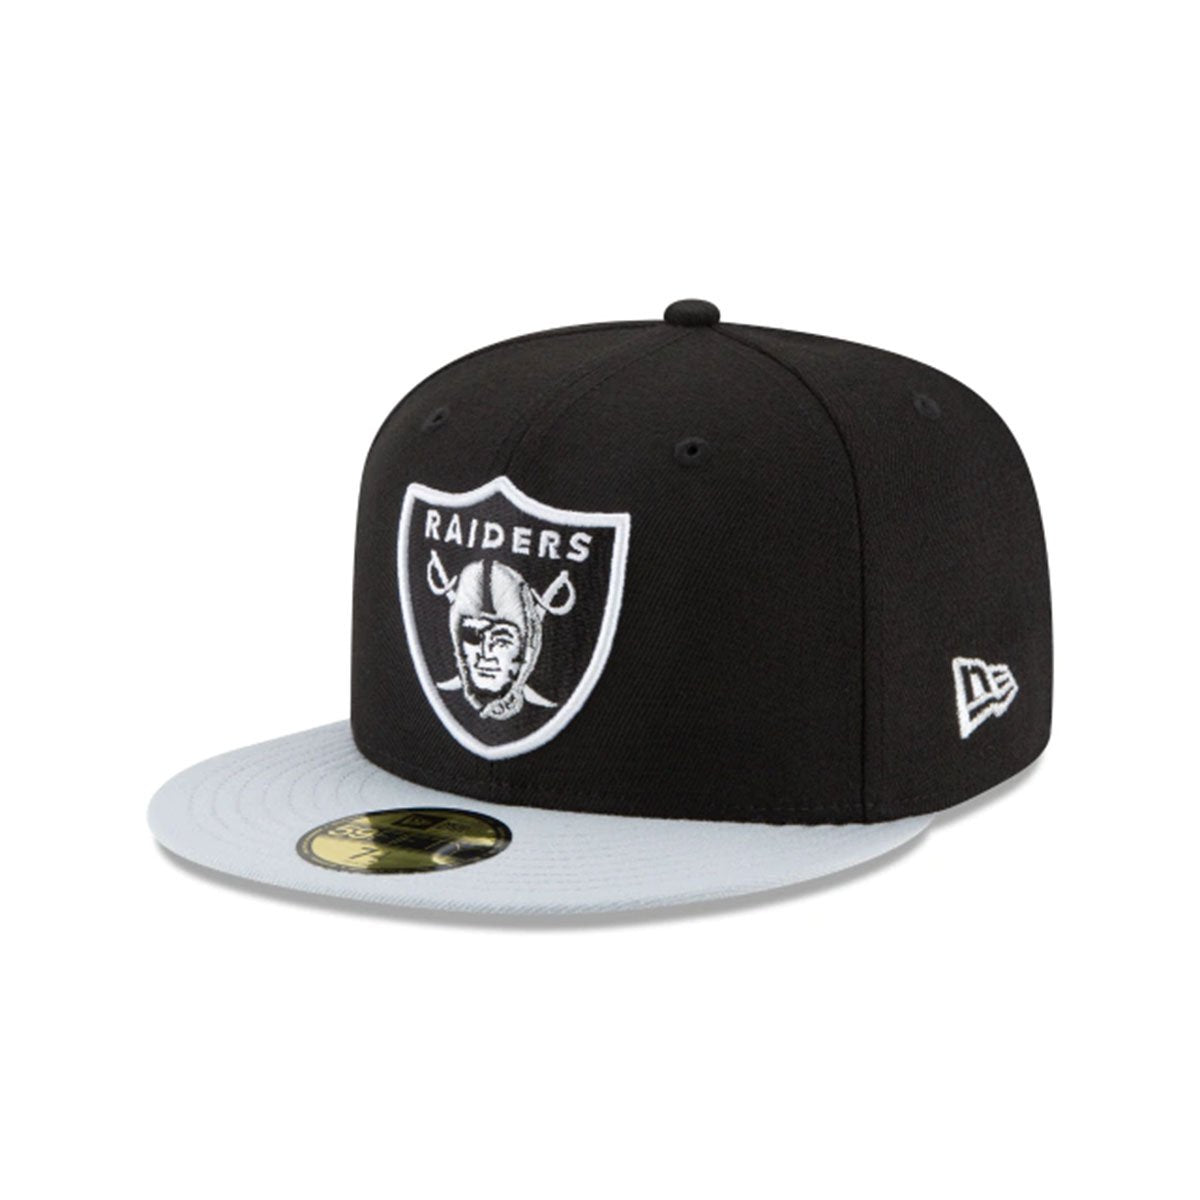 OAKLAND RAIDERS 59FIFTY FITTED BLACK/GRAY